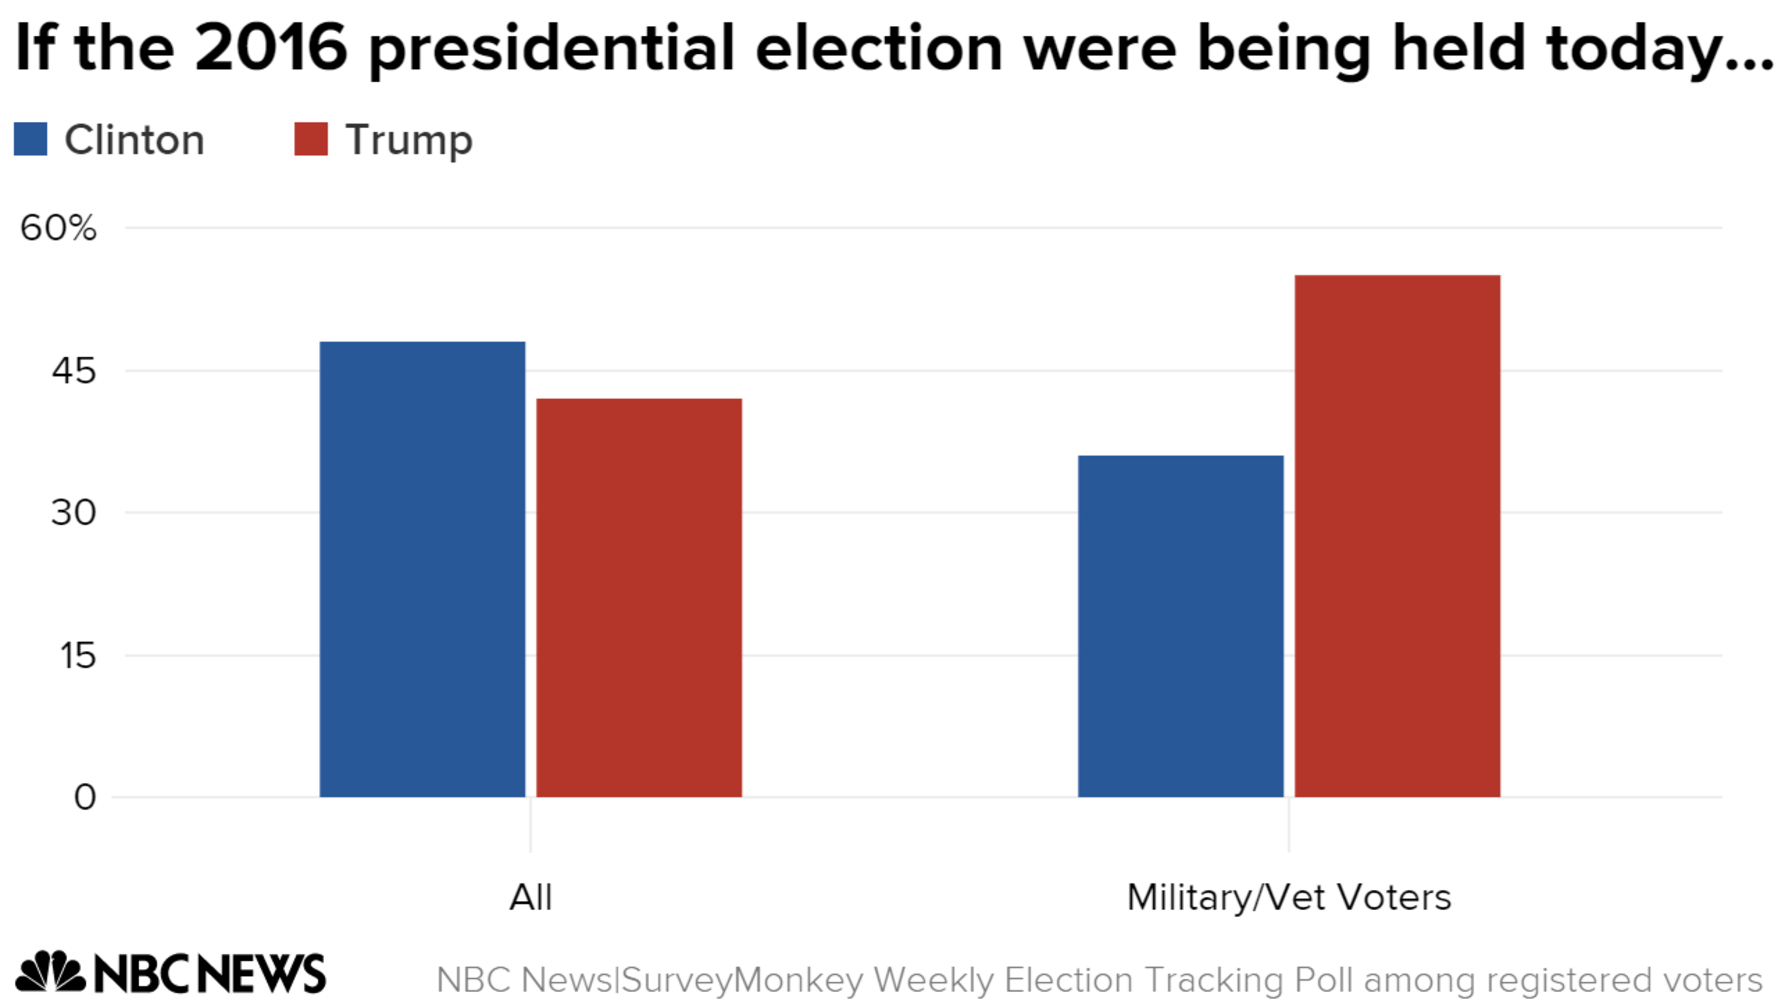 if_the_2016_presidential_election_were_being_held_today-_clinton_trump_chartbuilder_1_065e8496ff74e2abc9b402c4874d8b45.nbcnews-ux-2880-1000.png